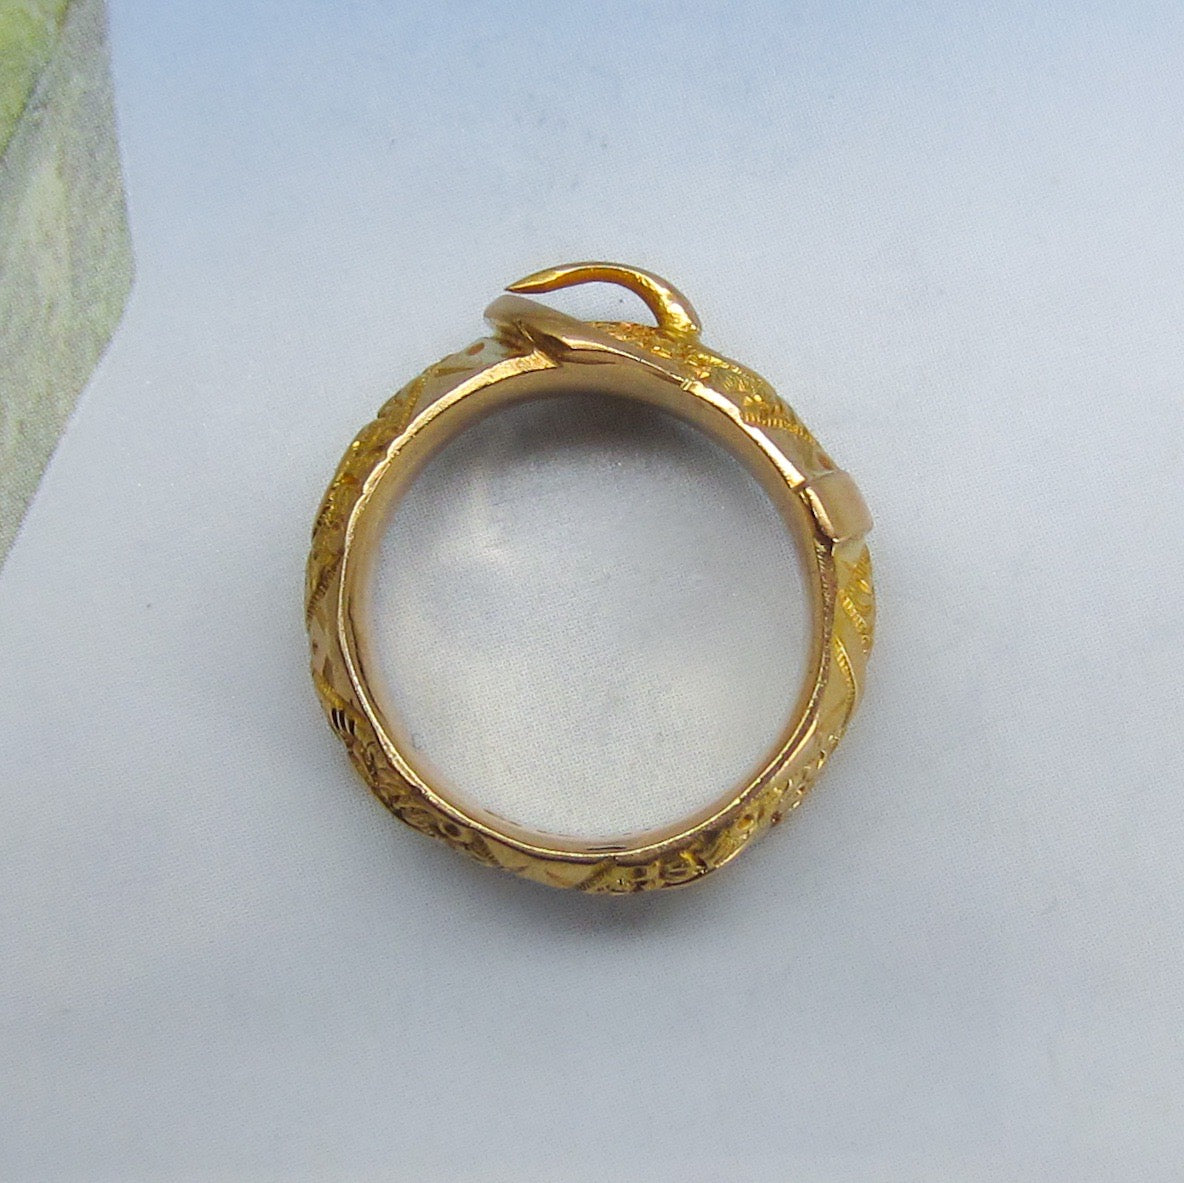 Victorian Wide Patterned Buckle Ring 18k, British c. 1890 size 6.25